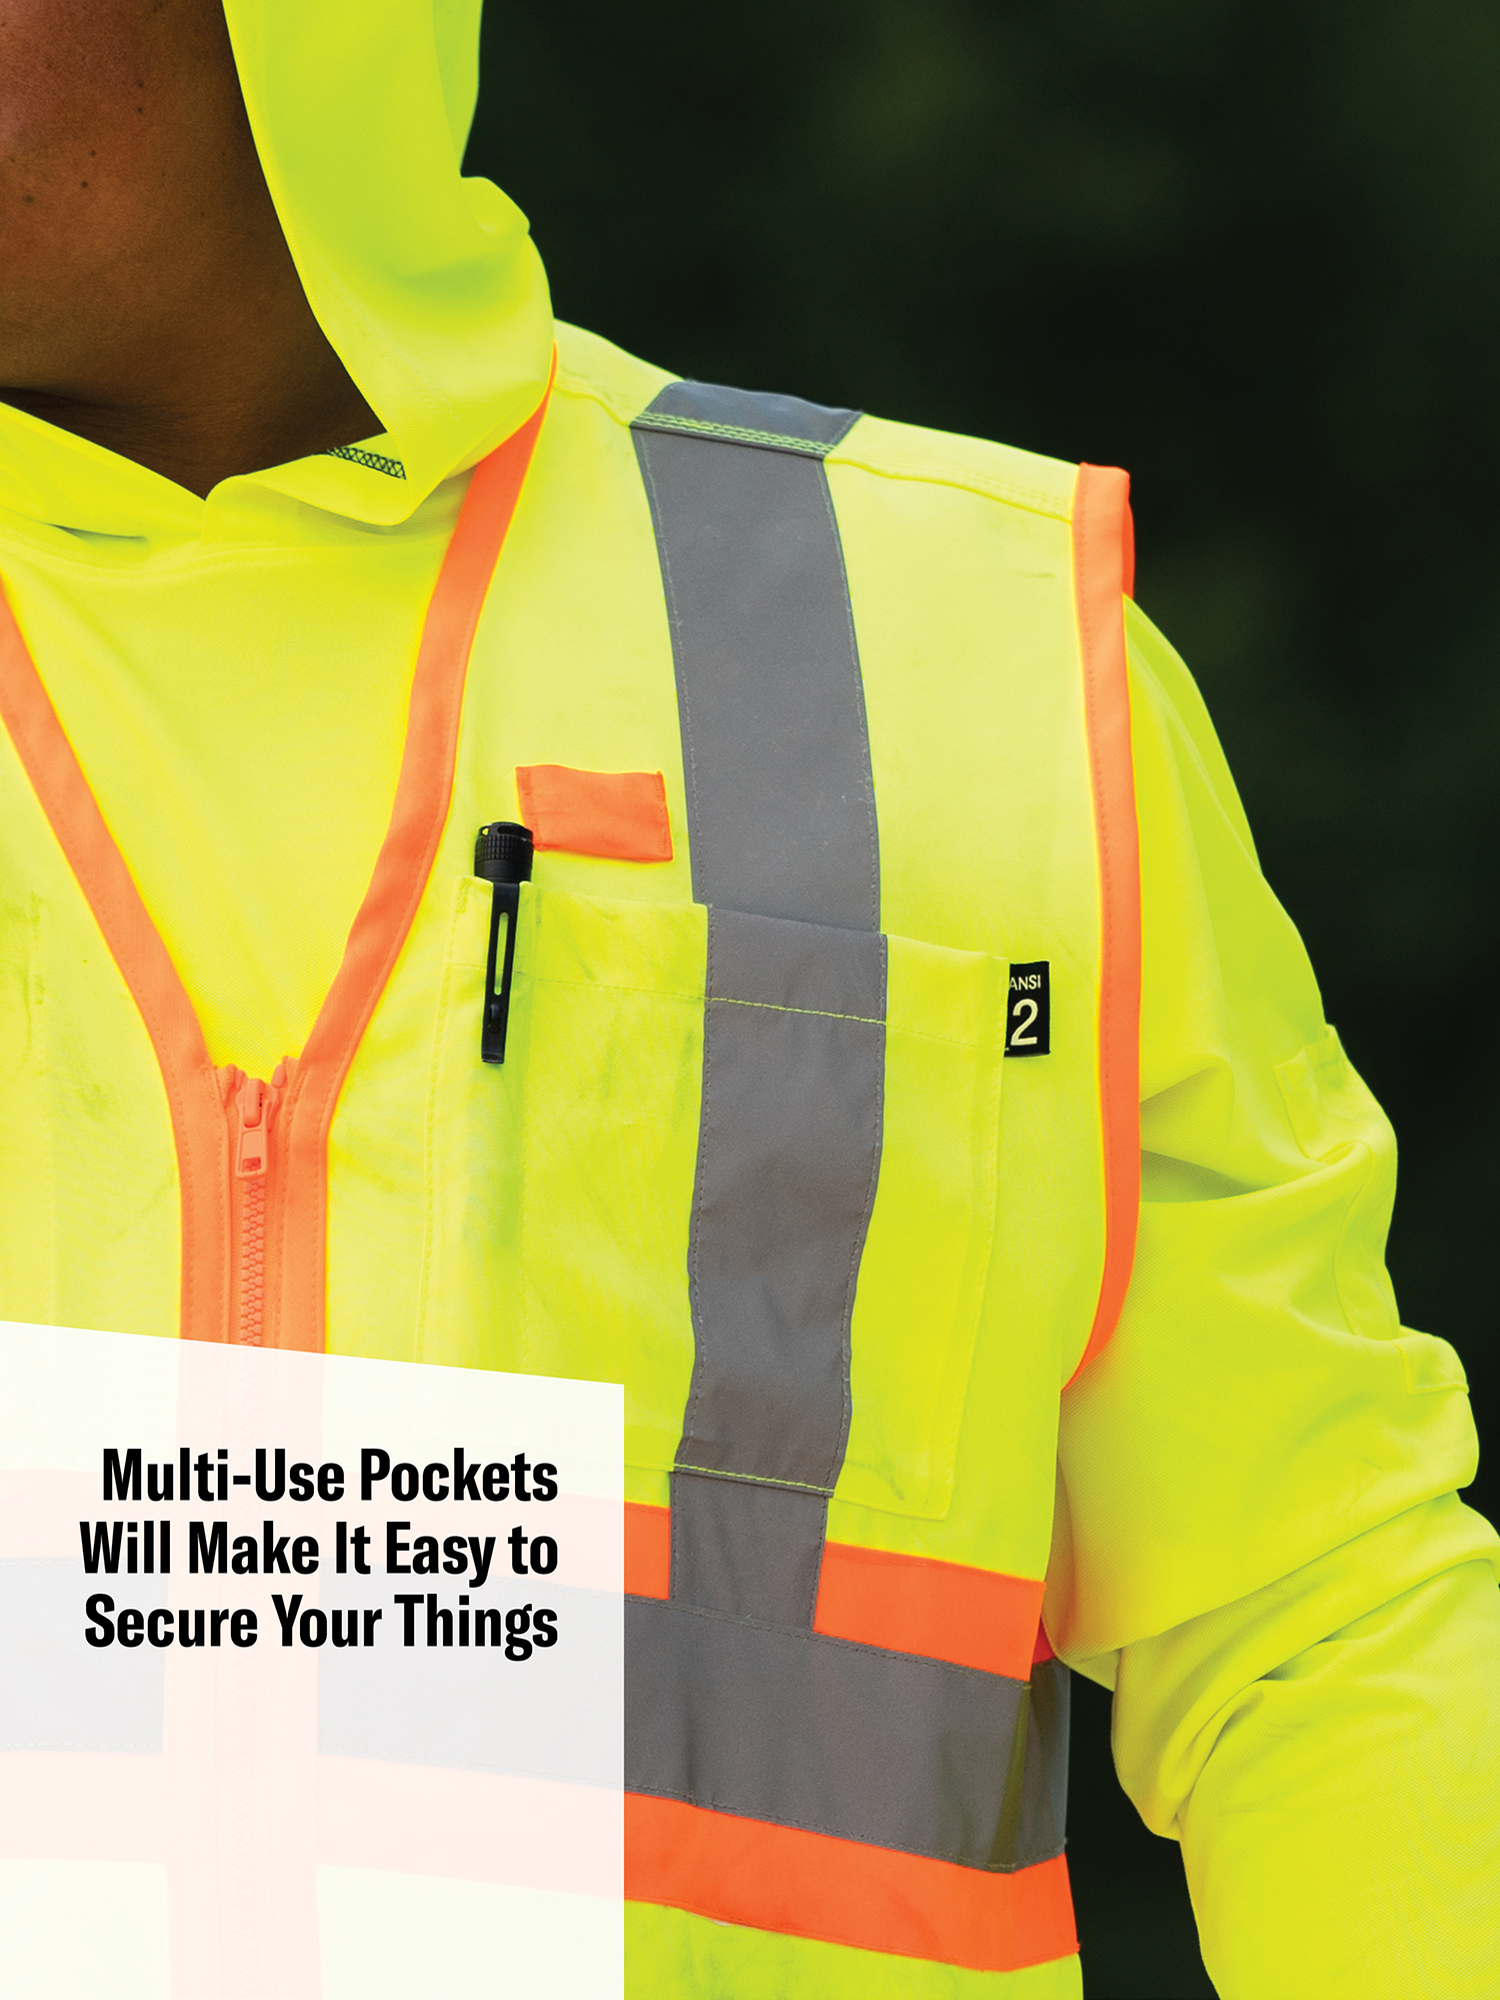 Genuine Dickies Safety Vest, Hi-Vis Synthetic Vest, 3M™ Scotchlite™ Reflective Taping, ANSI Class 2 - image 4 of 6